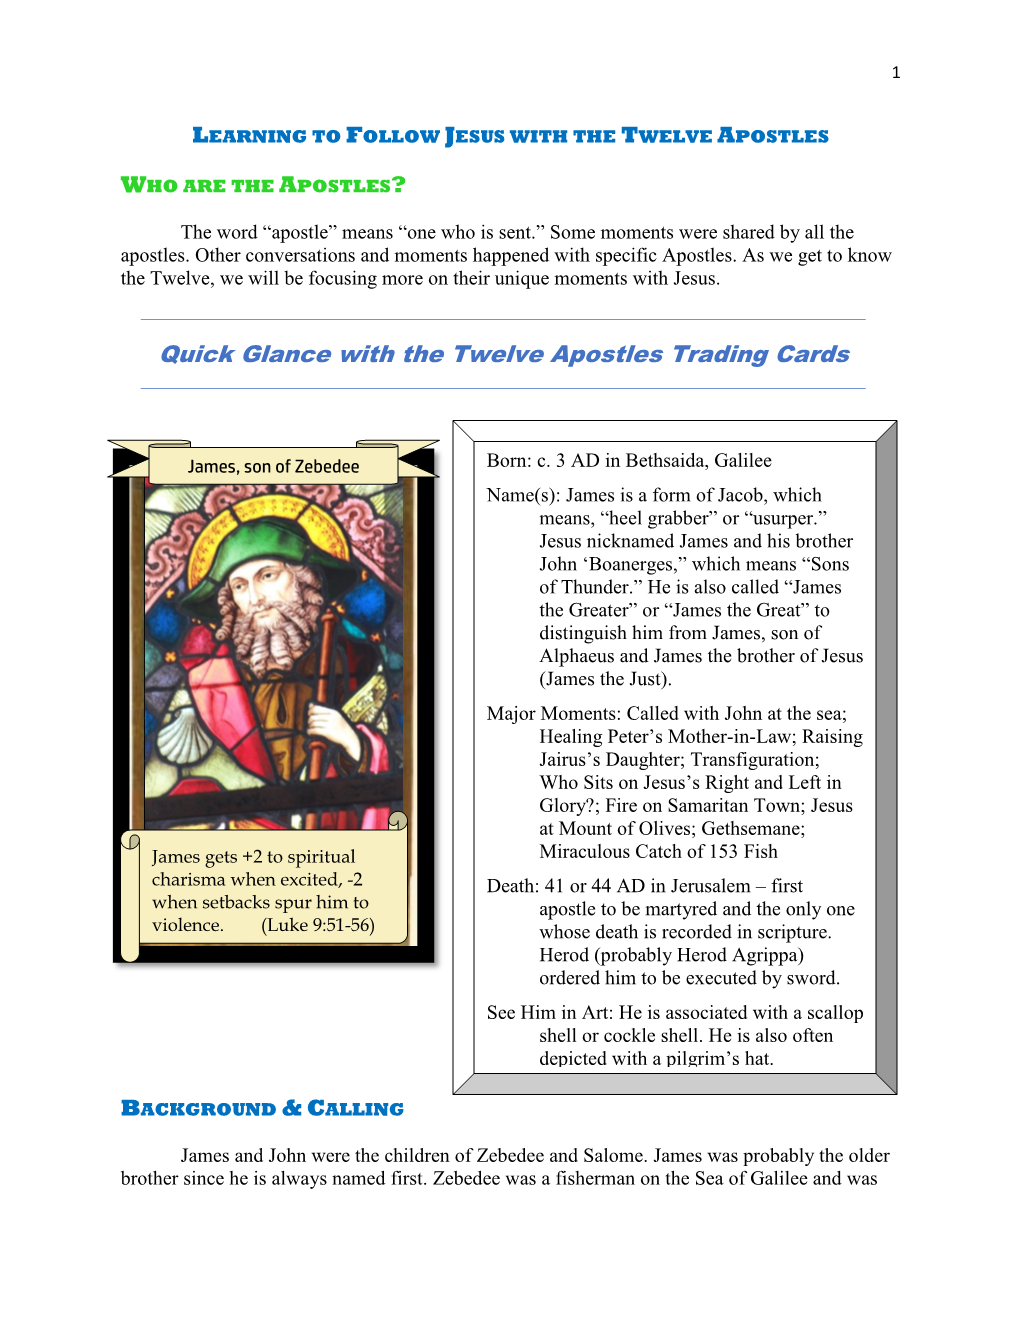 Quick Glance with the Twelve Apostles Trading Cards